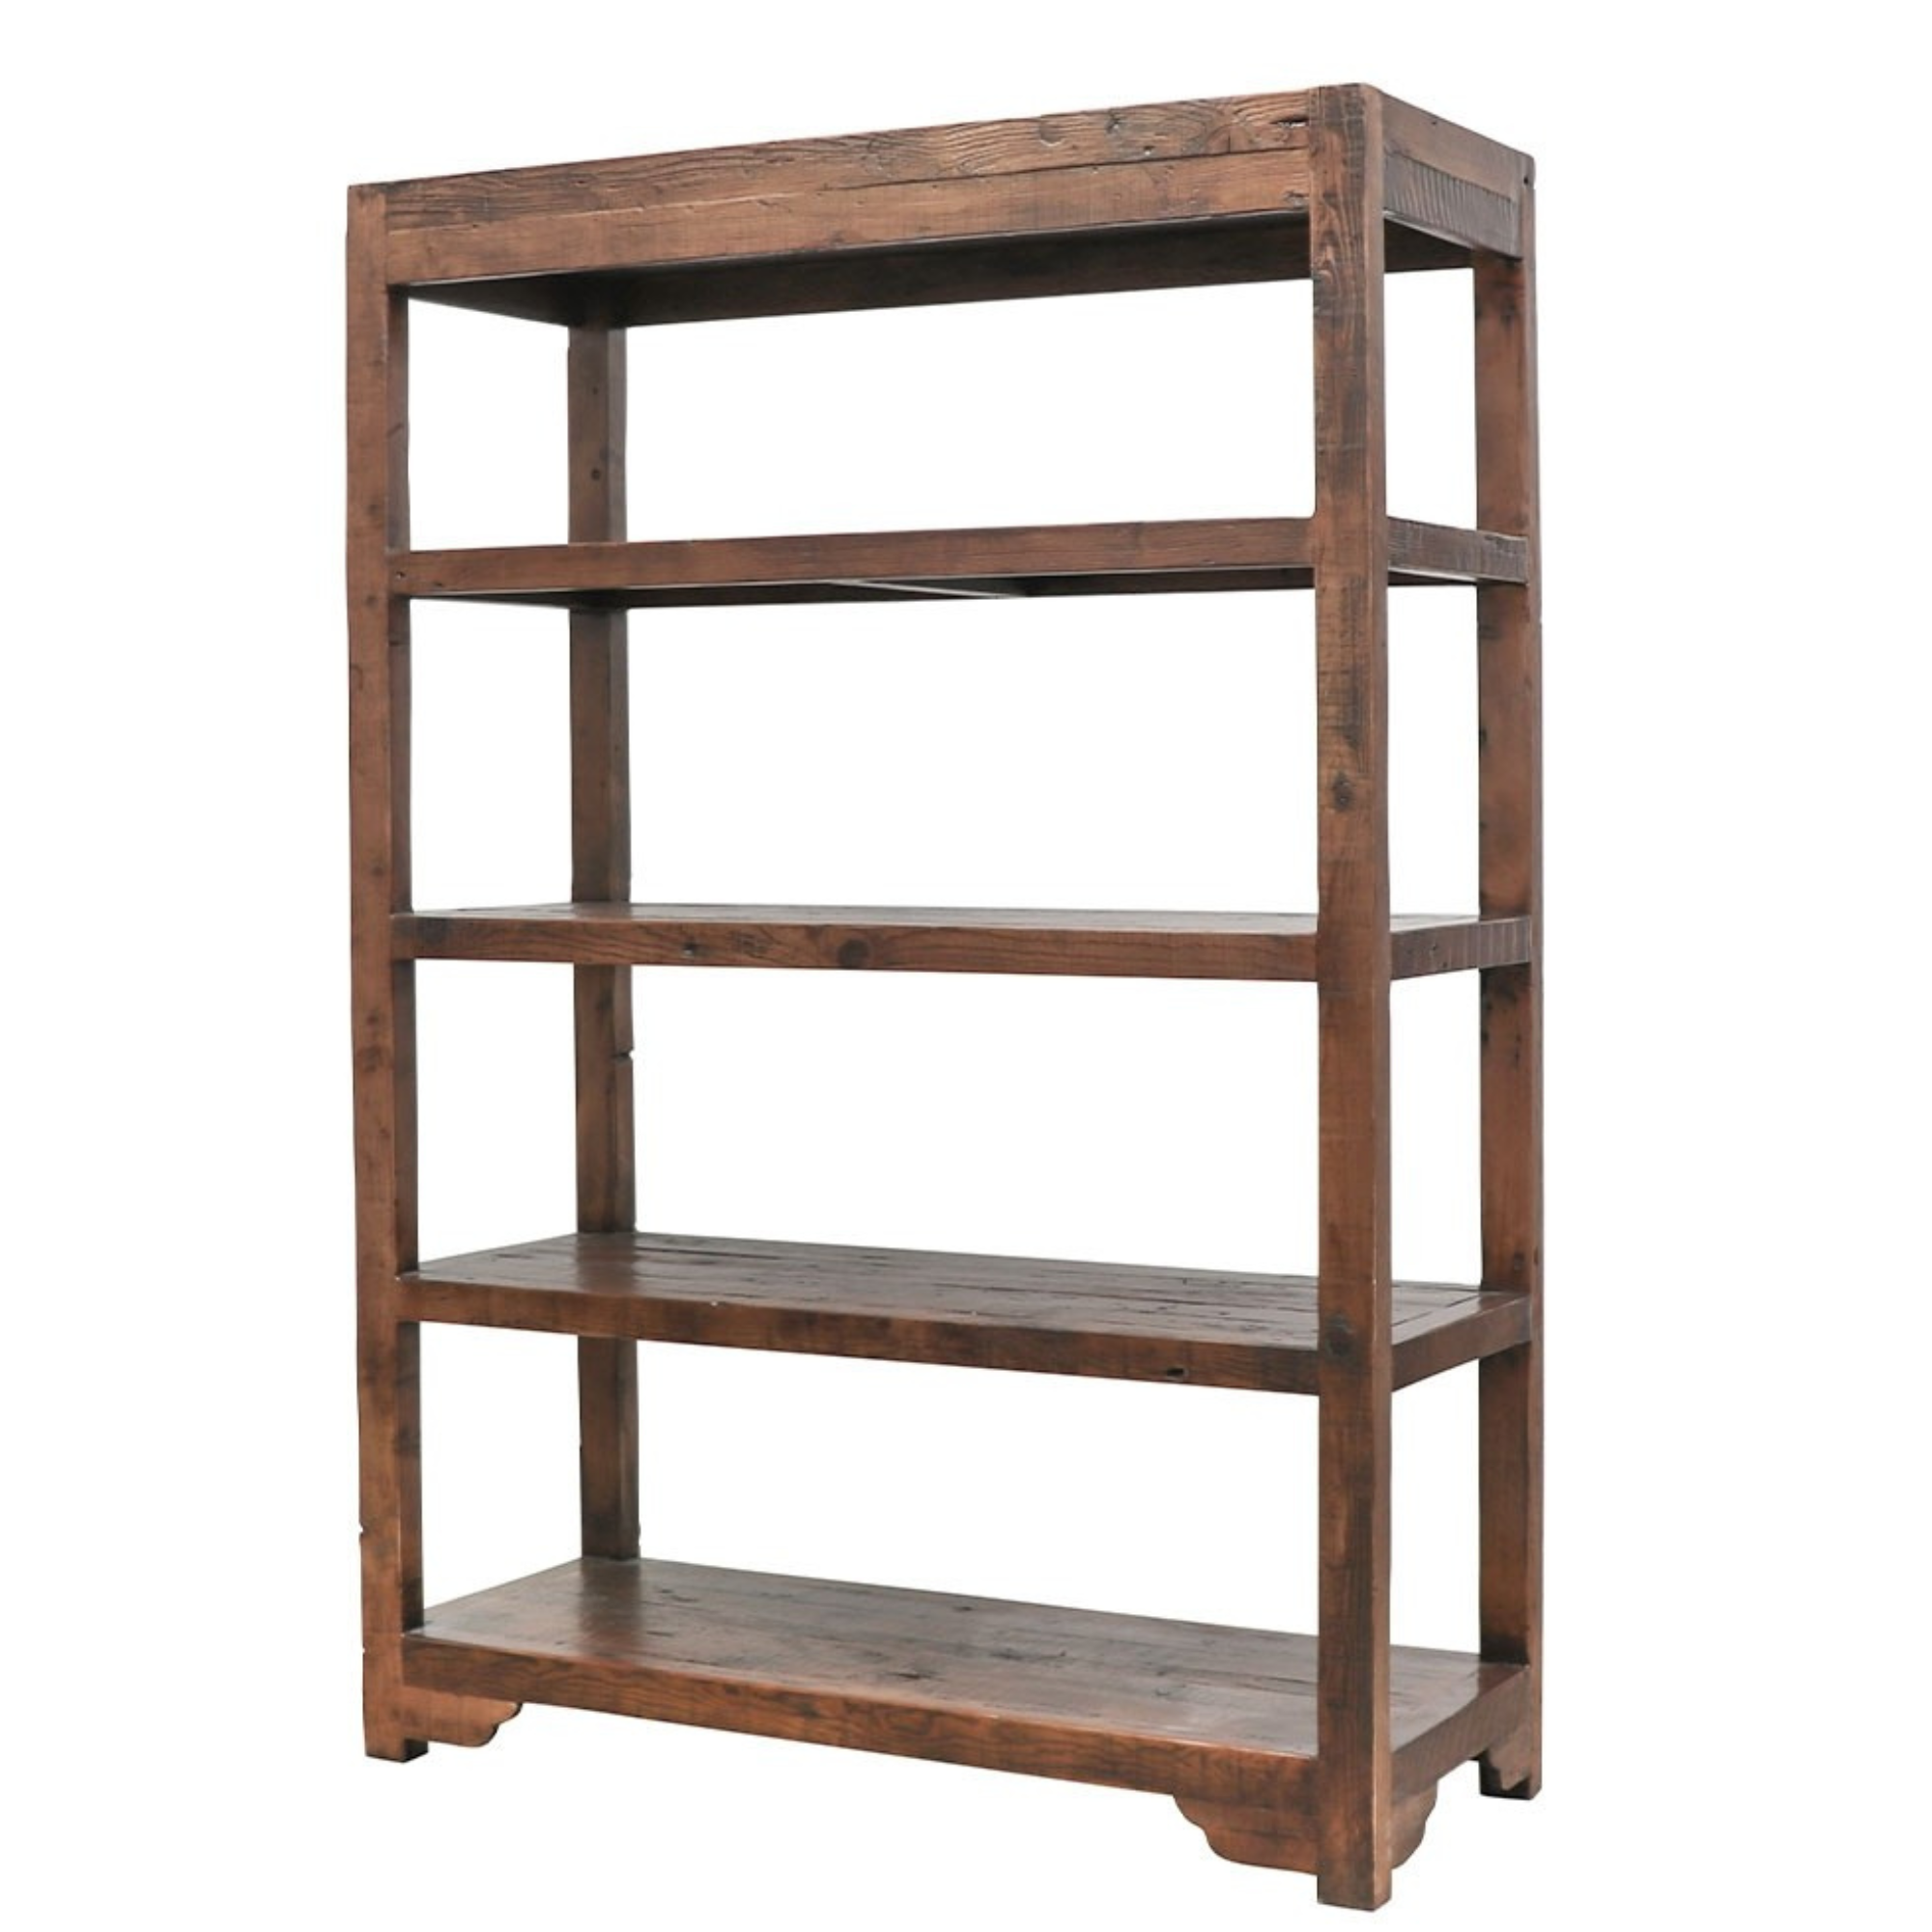 WOODEN TALL BAKERS RACK